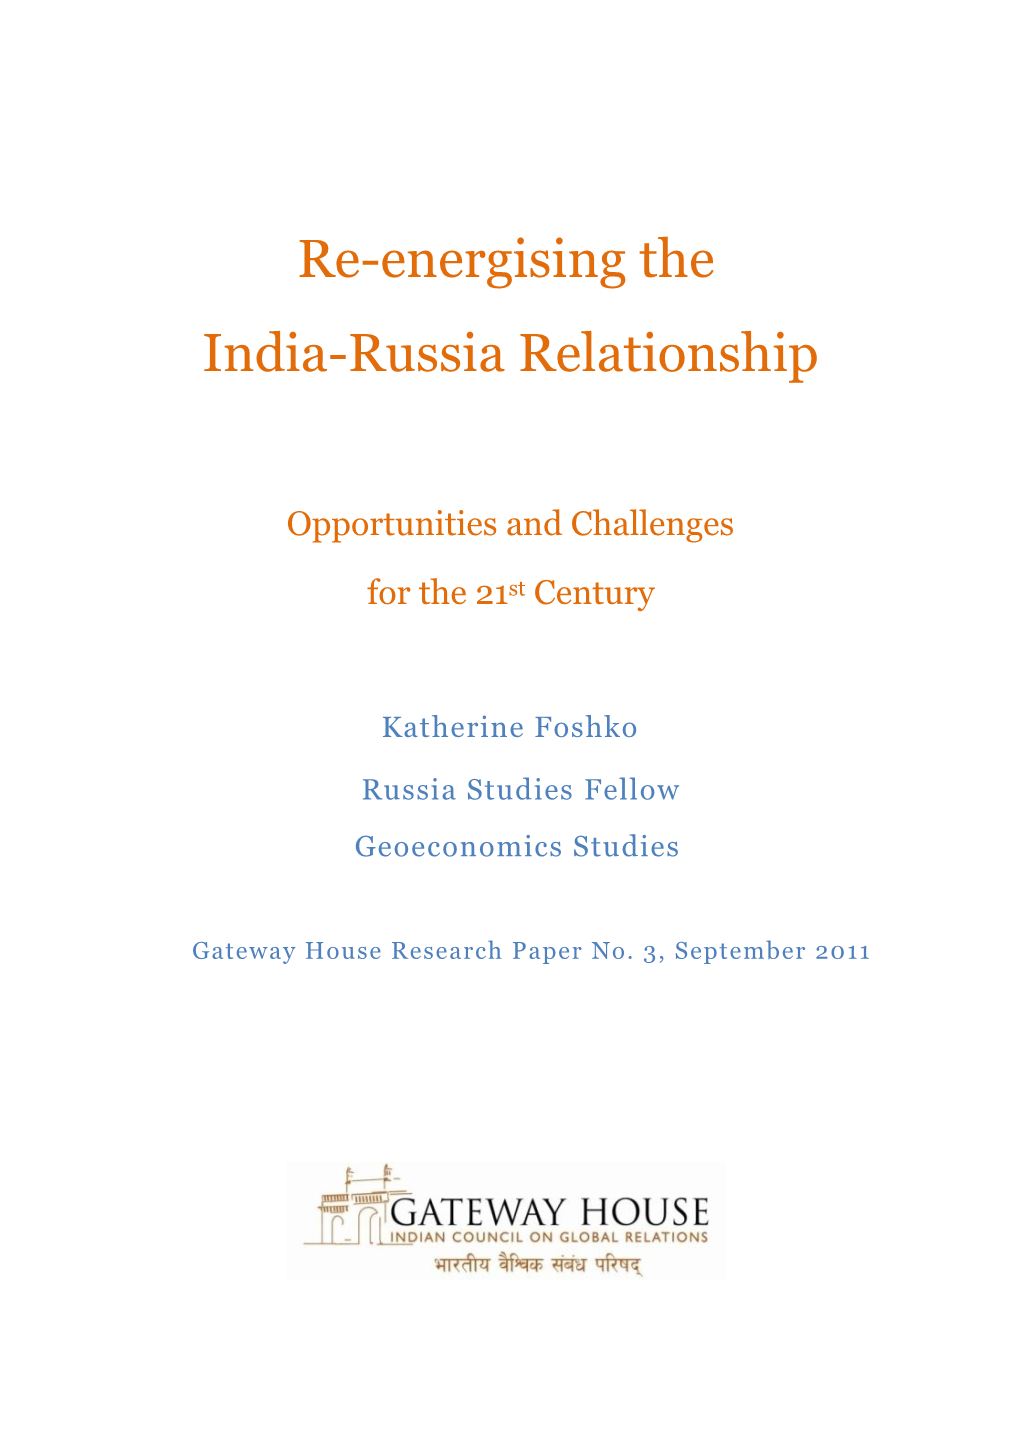 Re-Energising the India-Russia Relationship